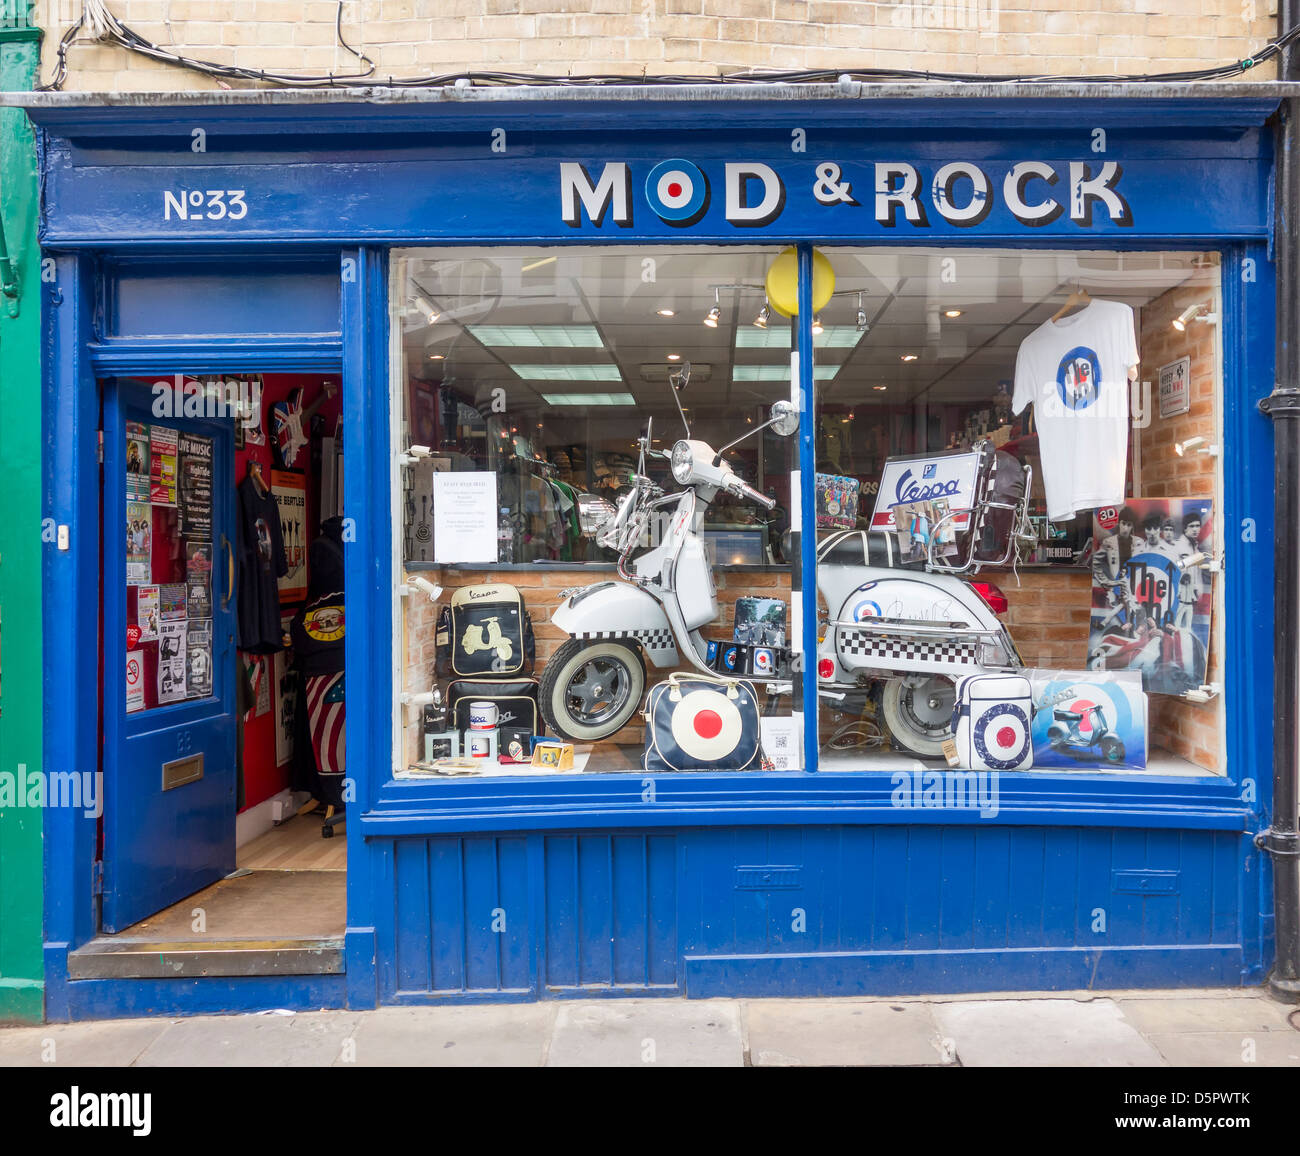 Mods and Rockers 60s Revival Shop Mod and Rock Burgate Canterbury. Stock Photo